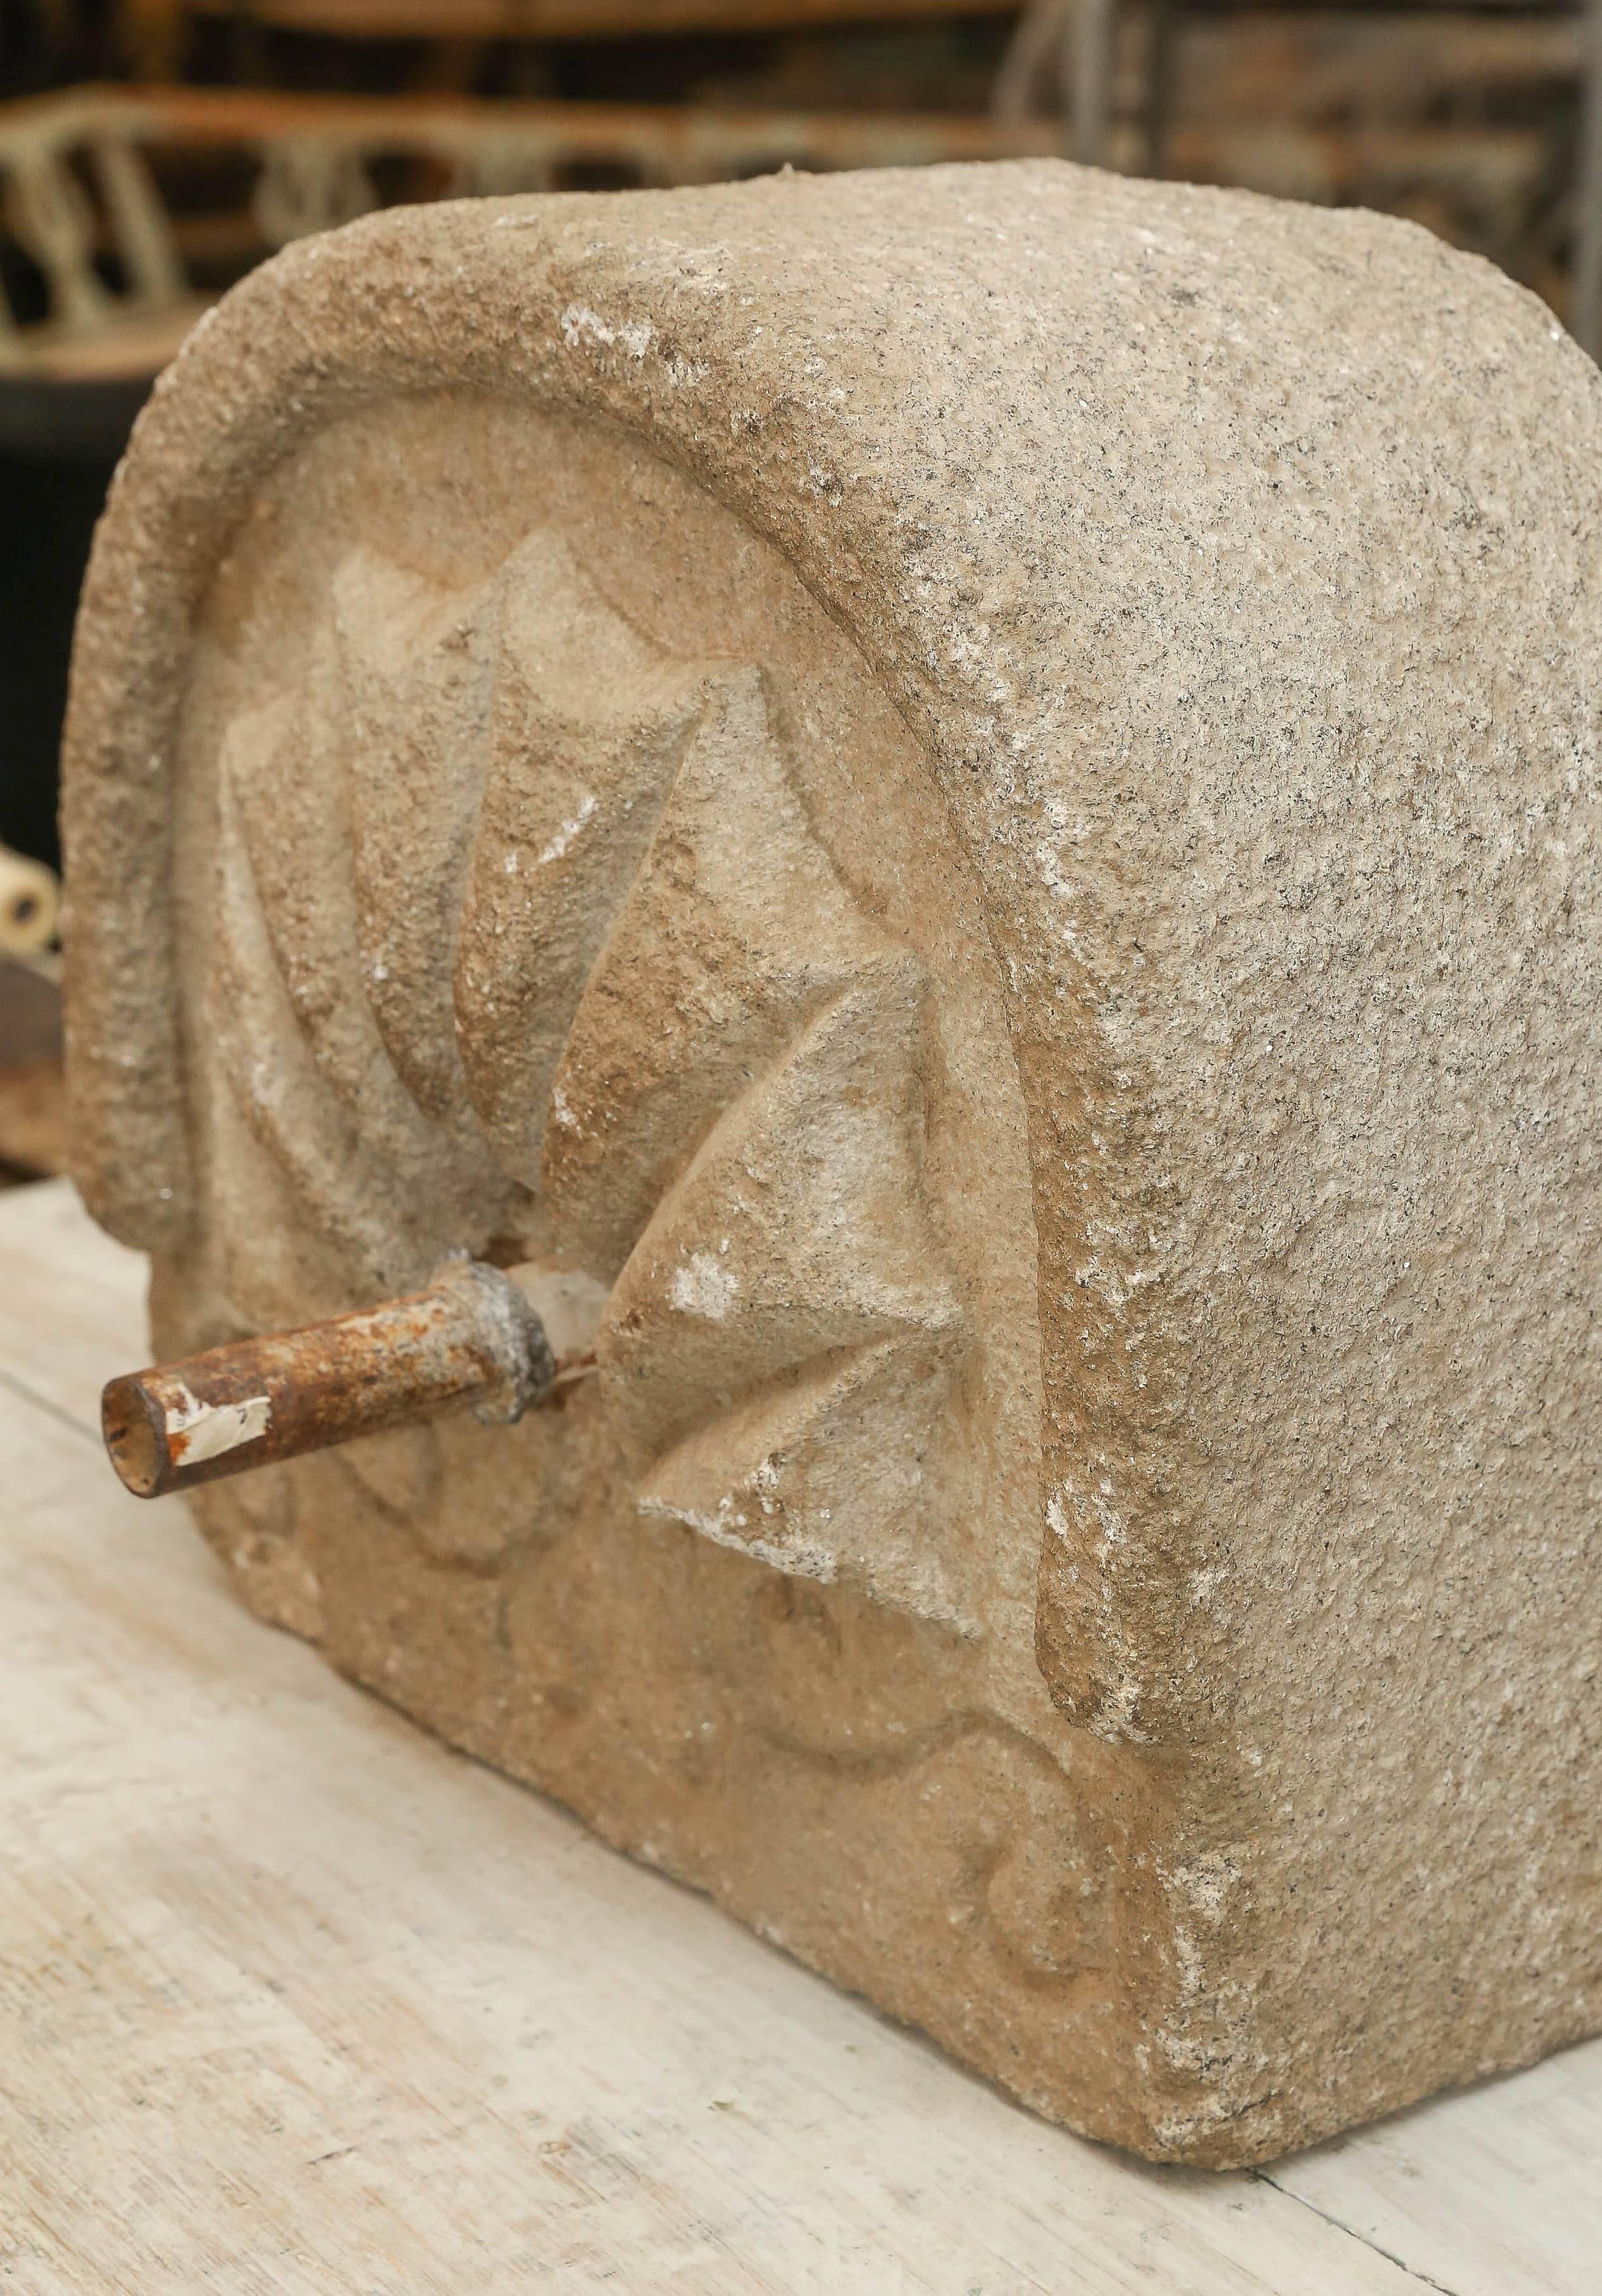 Stone fountain from Portugal with iron spout from 1800s or before. It is great for an outdoor fountain or back mount for a sink.

The dimensions of the depth with the spout is 11".